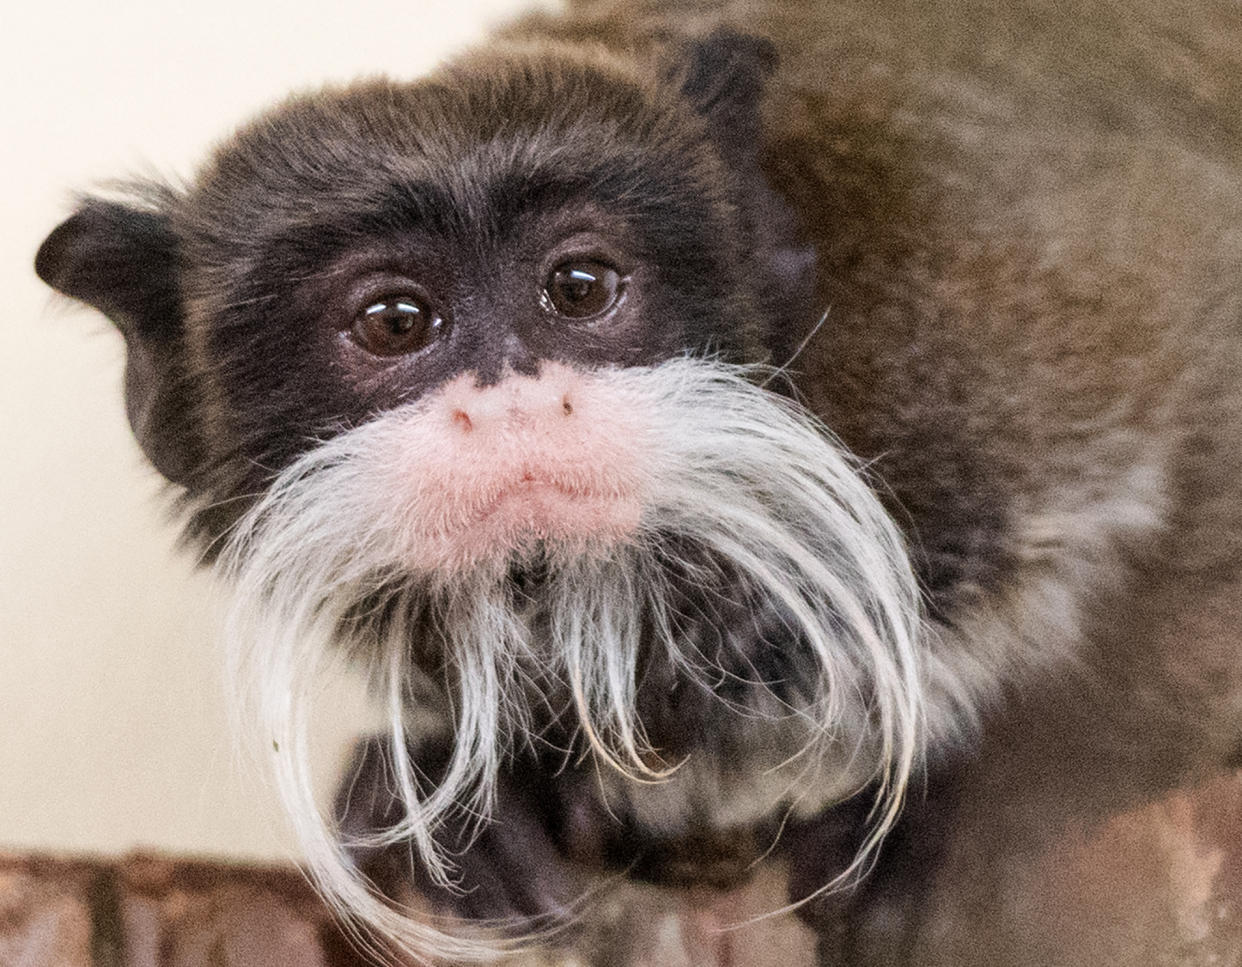 Tim the emperor tamarin sits in his enclosure at the zoo in Neumuenster, Germany, 04 March 2016. Photo: Daniel Bockwoldt/dpa | usage worldwide   (Photo by Daniel Bockwoldt/picture alliance via Getty Images)